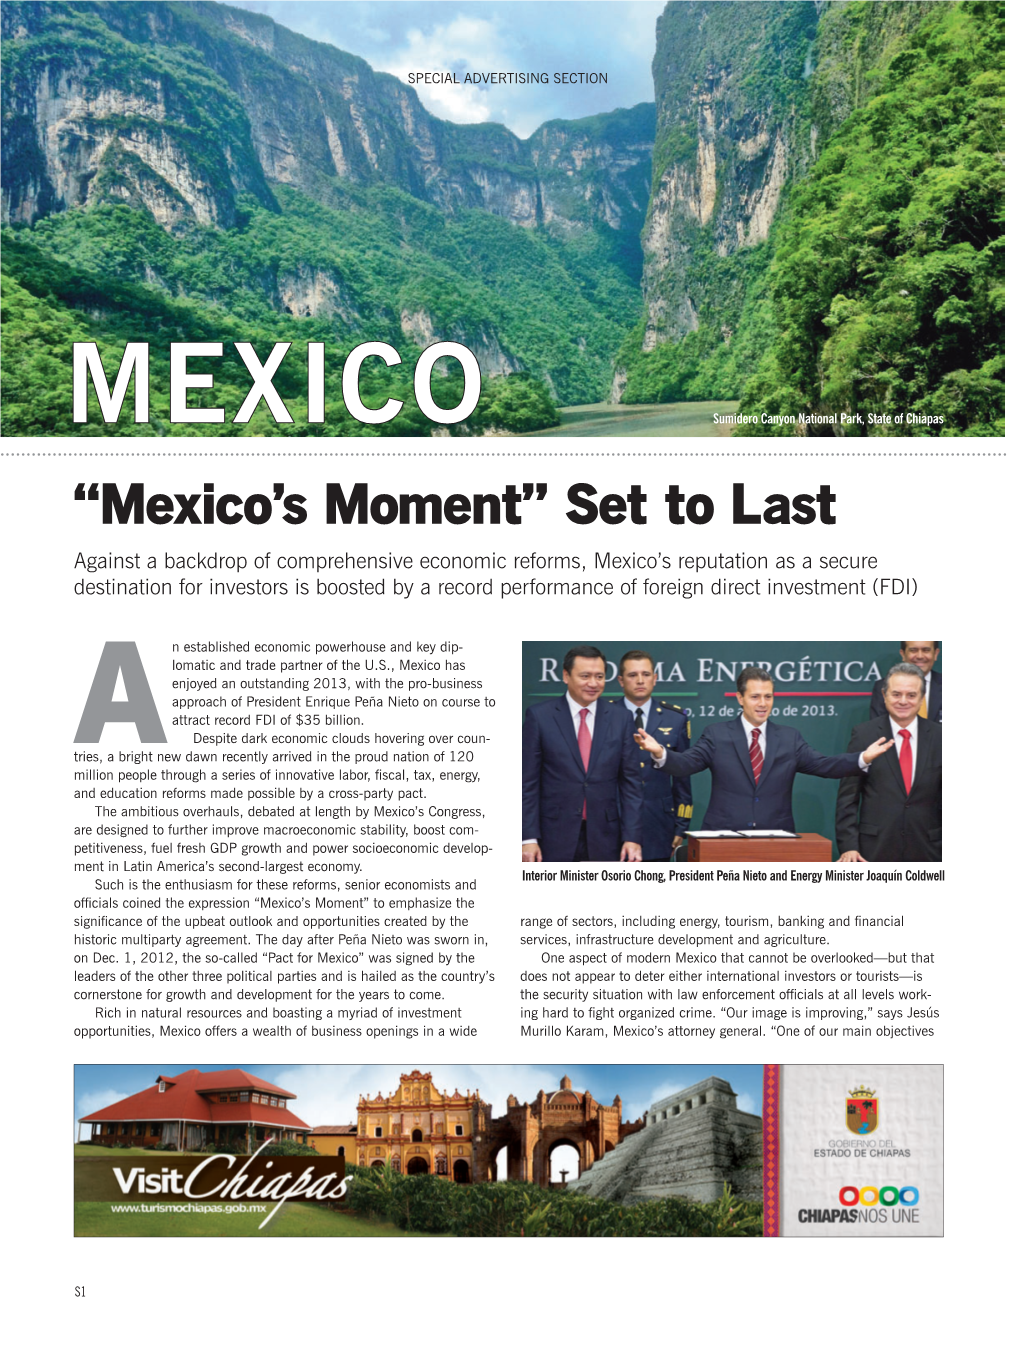 Mexico: “Mexico's Moment” Set to Last